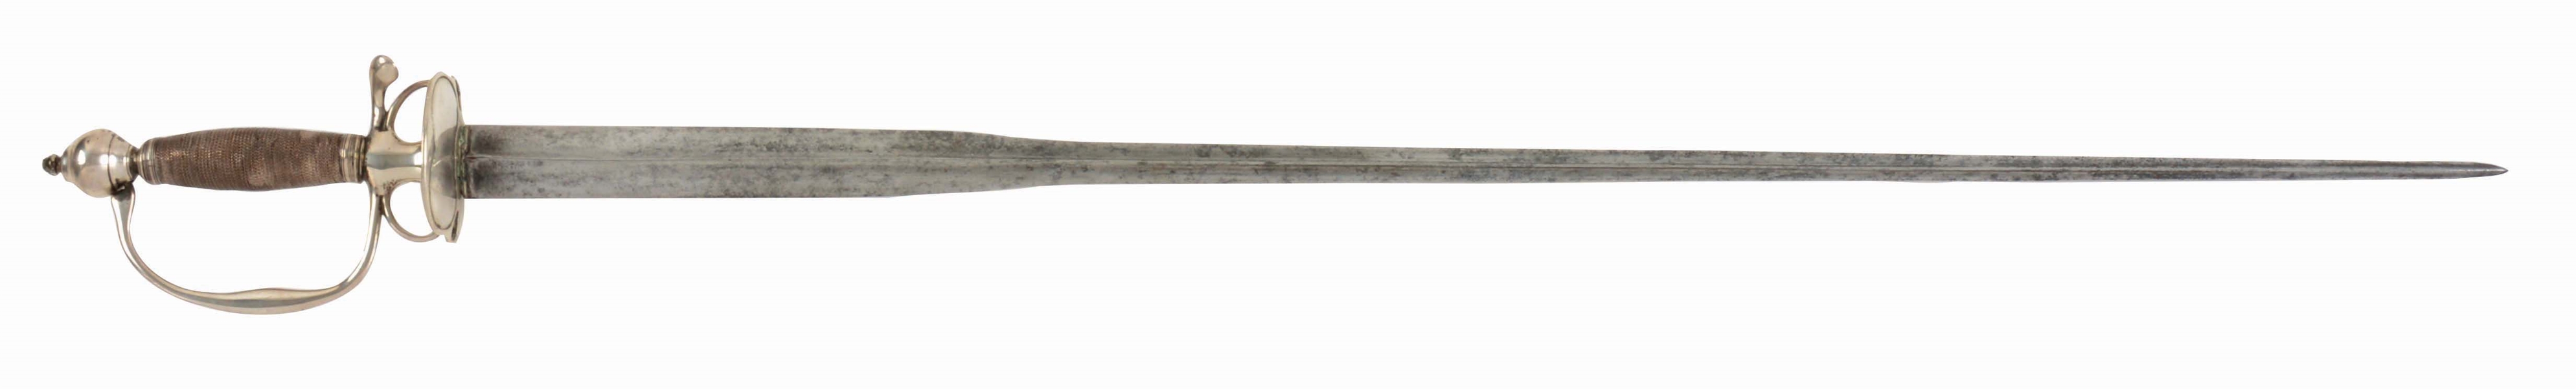 EARLY AND FINE SILVER-HILTED SMALL SWORD.